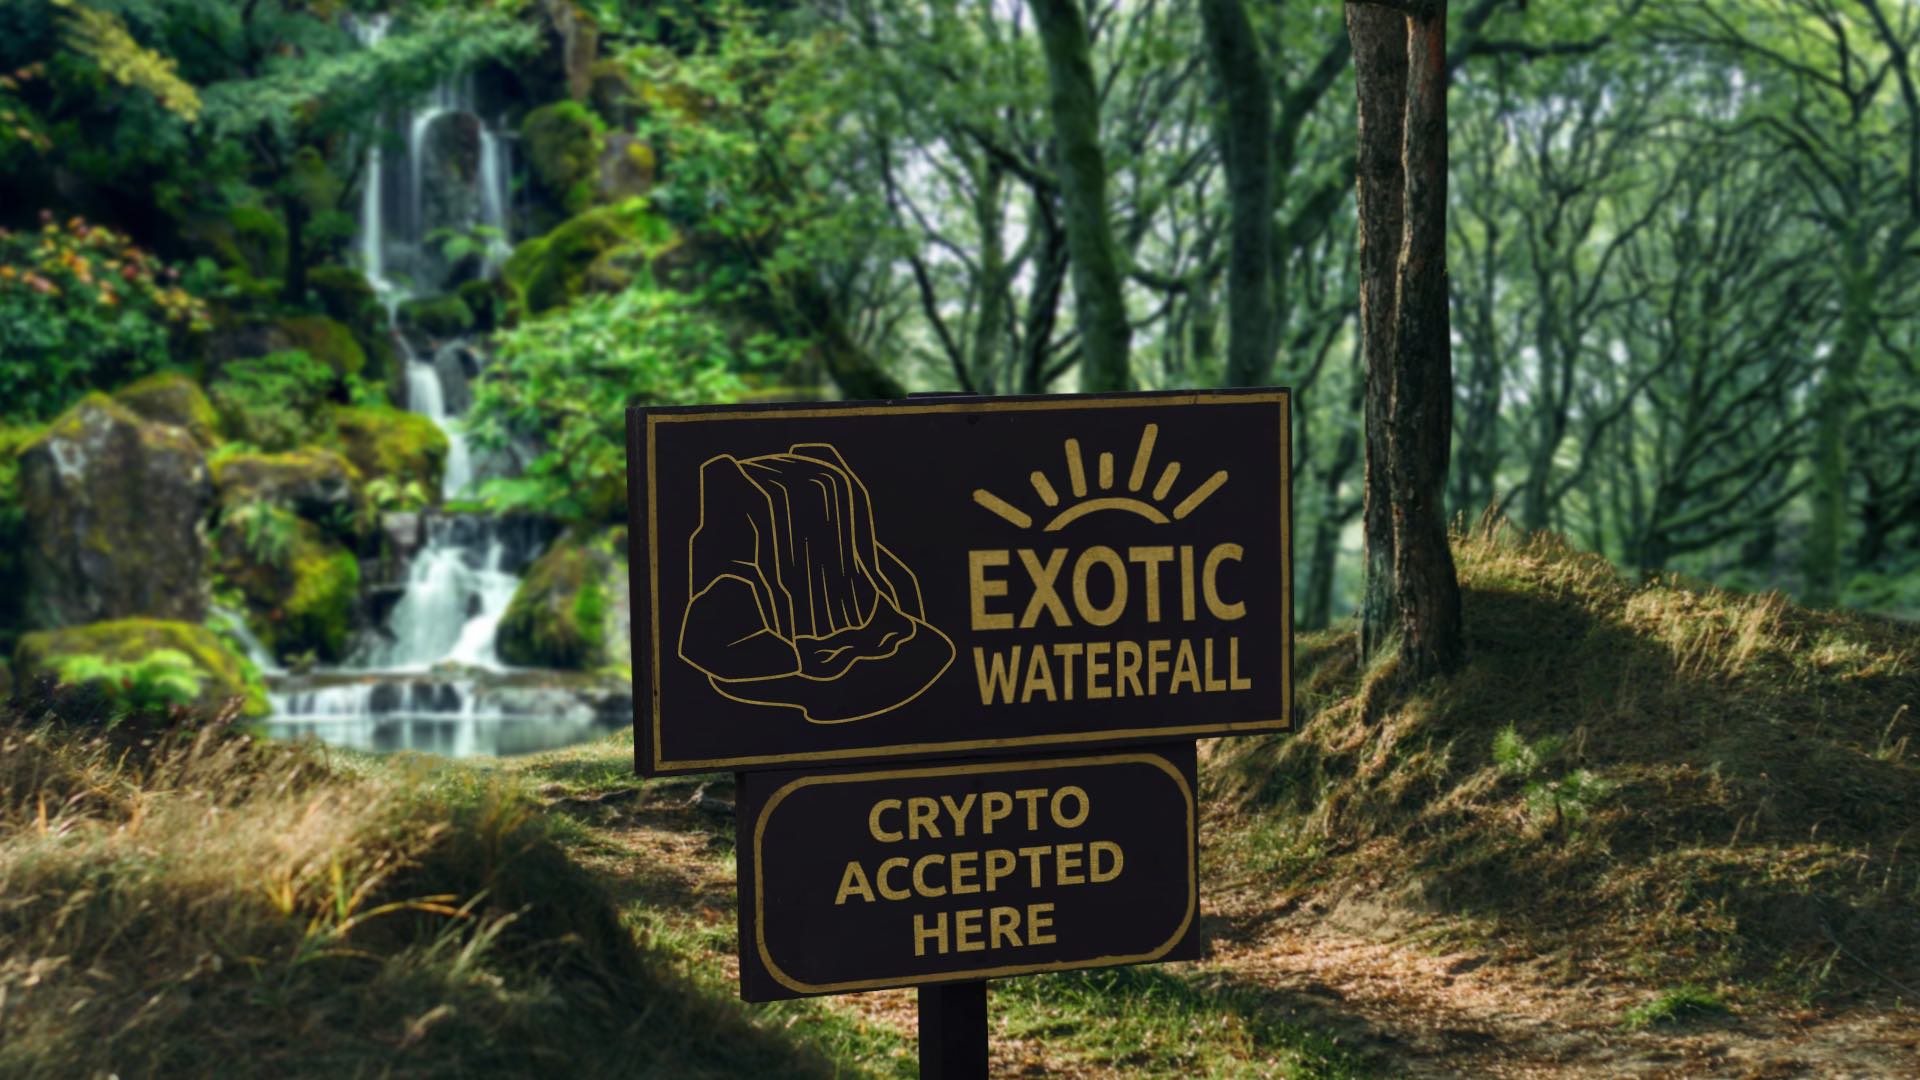 Exotic Vacation Spots You Never Heard of, But Can Book with Crypto